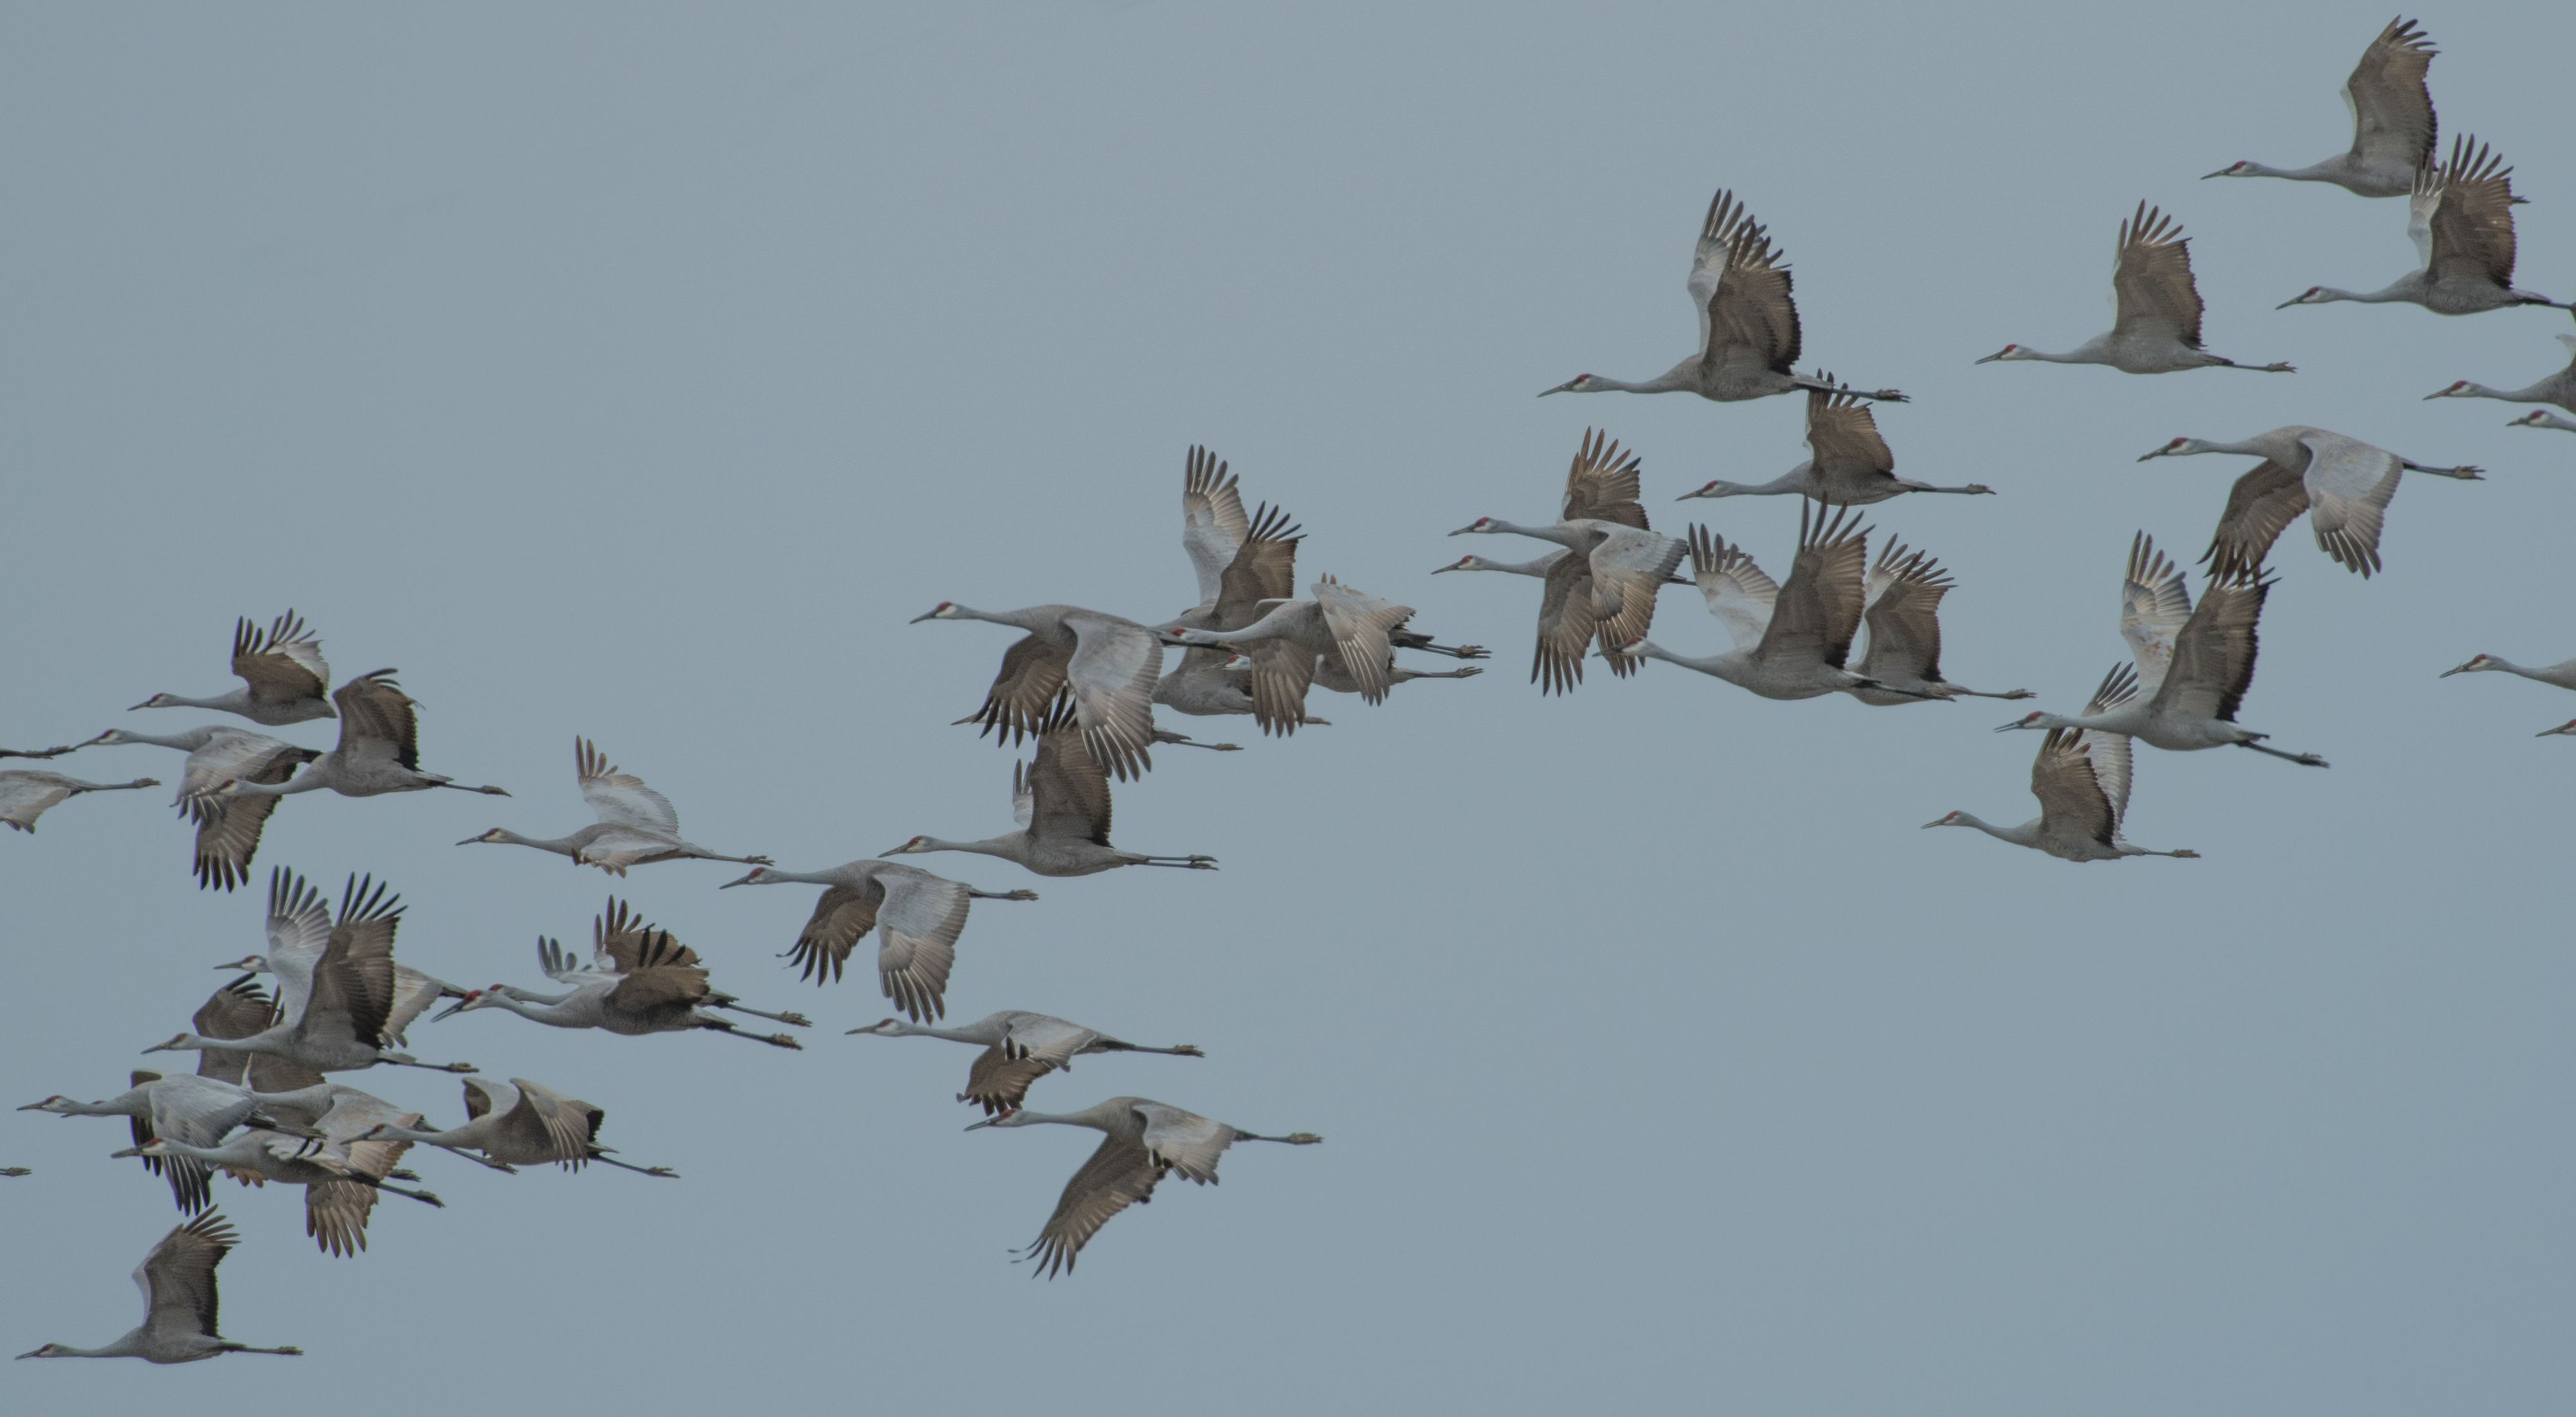 A flock of large gray cranes in flight.